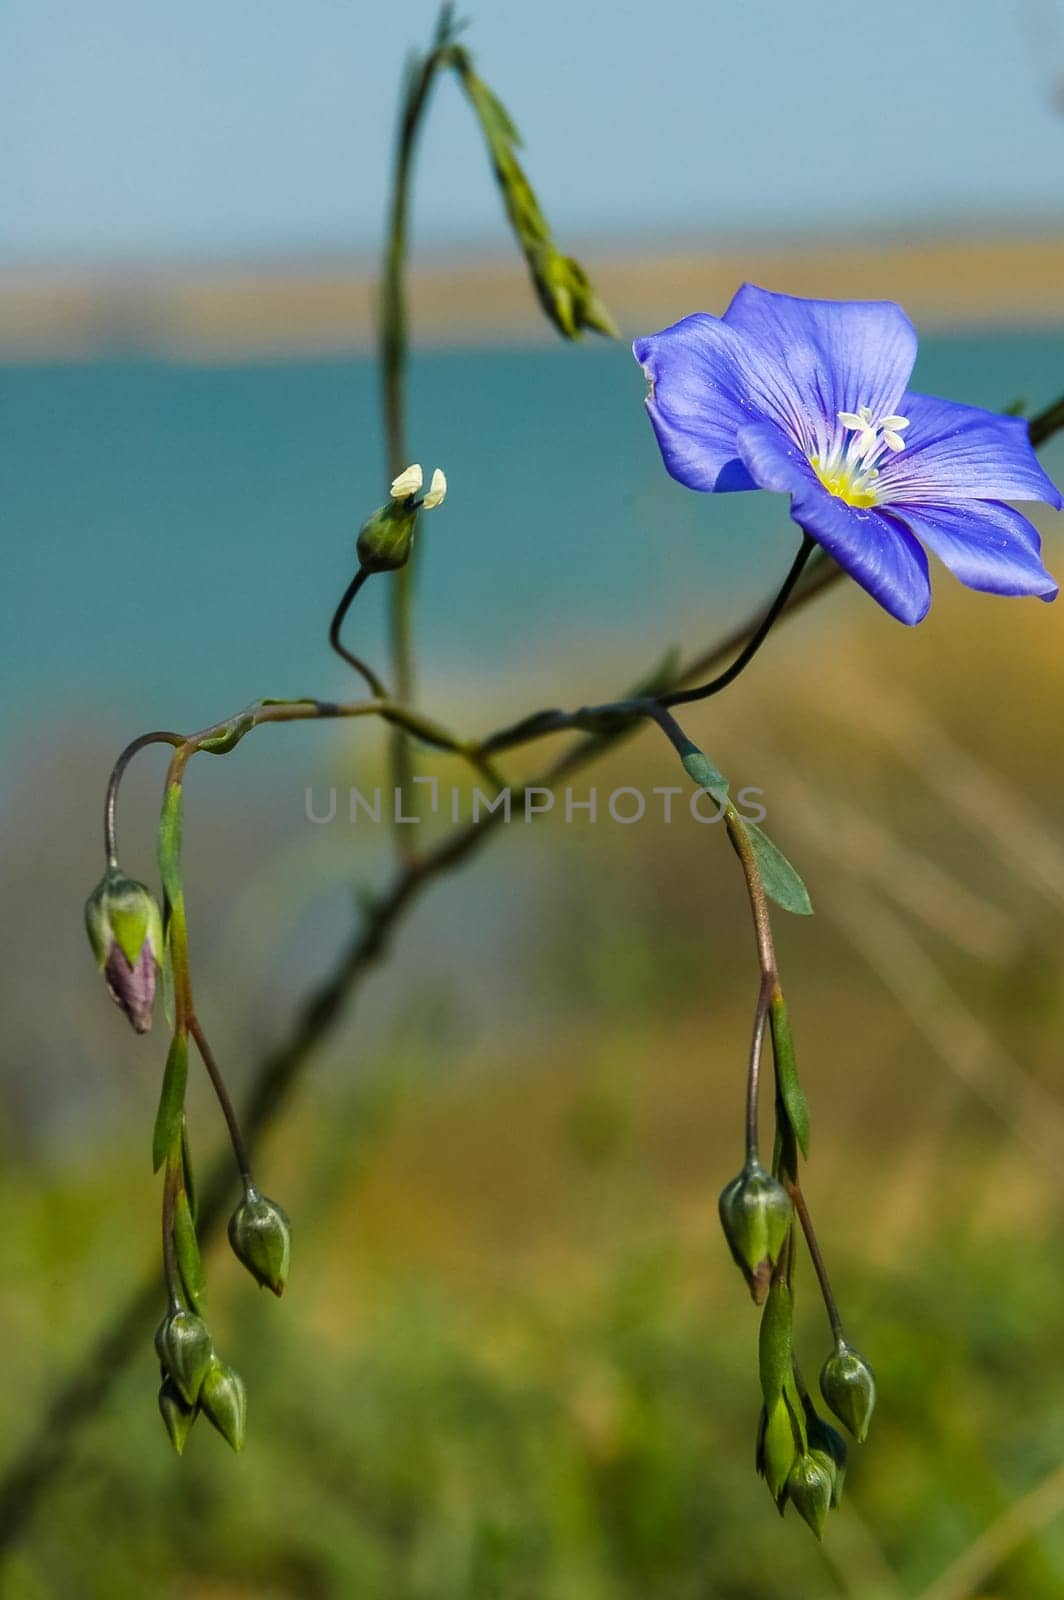 (Linum lewisii), A blue flowering plant in the wild